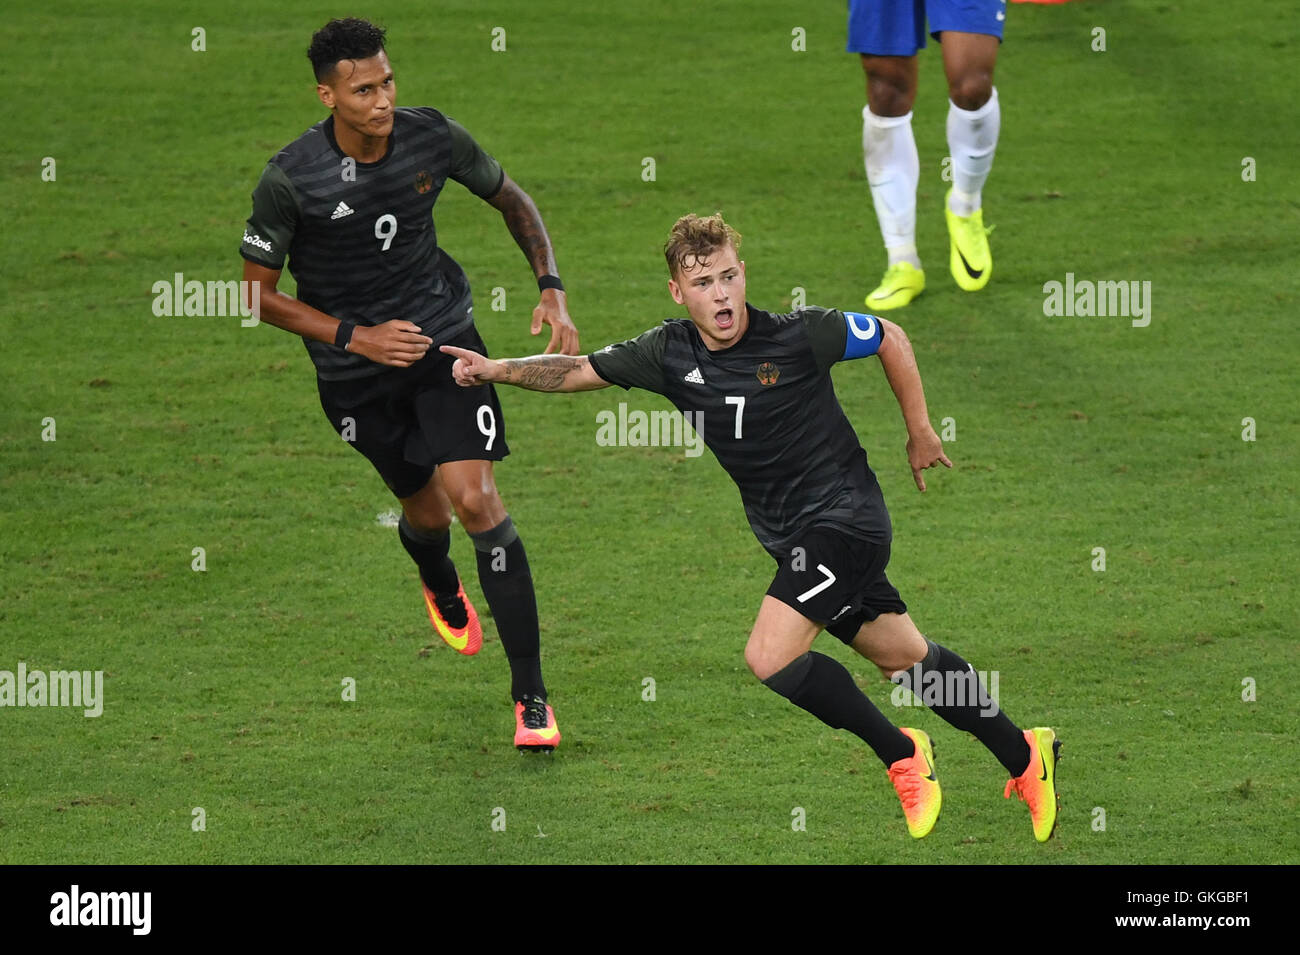 Rio de Janeiro, Brazil. 20th Aug, 2016. Maximilian Meyer (R) of Germany celebrates with teammate Davie Selke after he scored the 1:1 during the Men's soccer Gold Medal Match between Brazil and Germany during the Rio 2016 Olympic Games at the Maracana in Rio de Janeiro, Brazil, 20 August 2016. Photo: Sebastian Kahnert/dpa/Alamy Live News Stock Photo